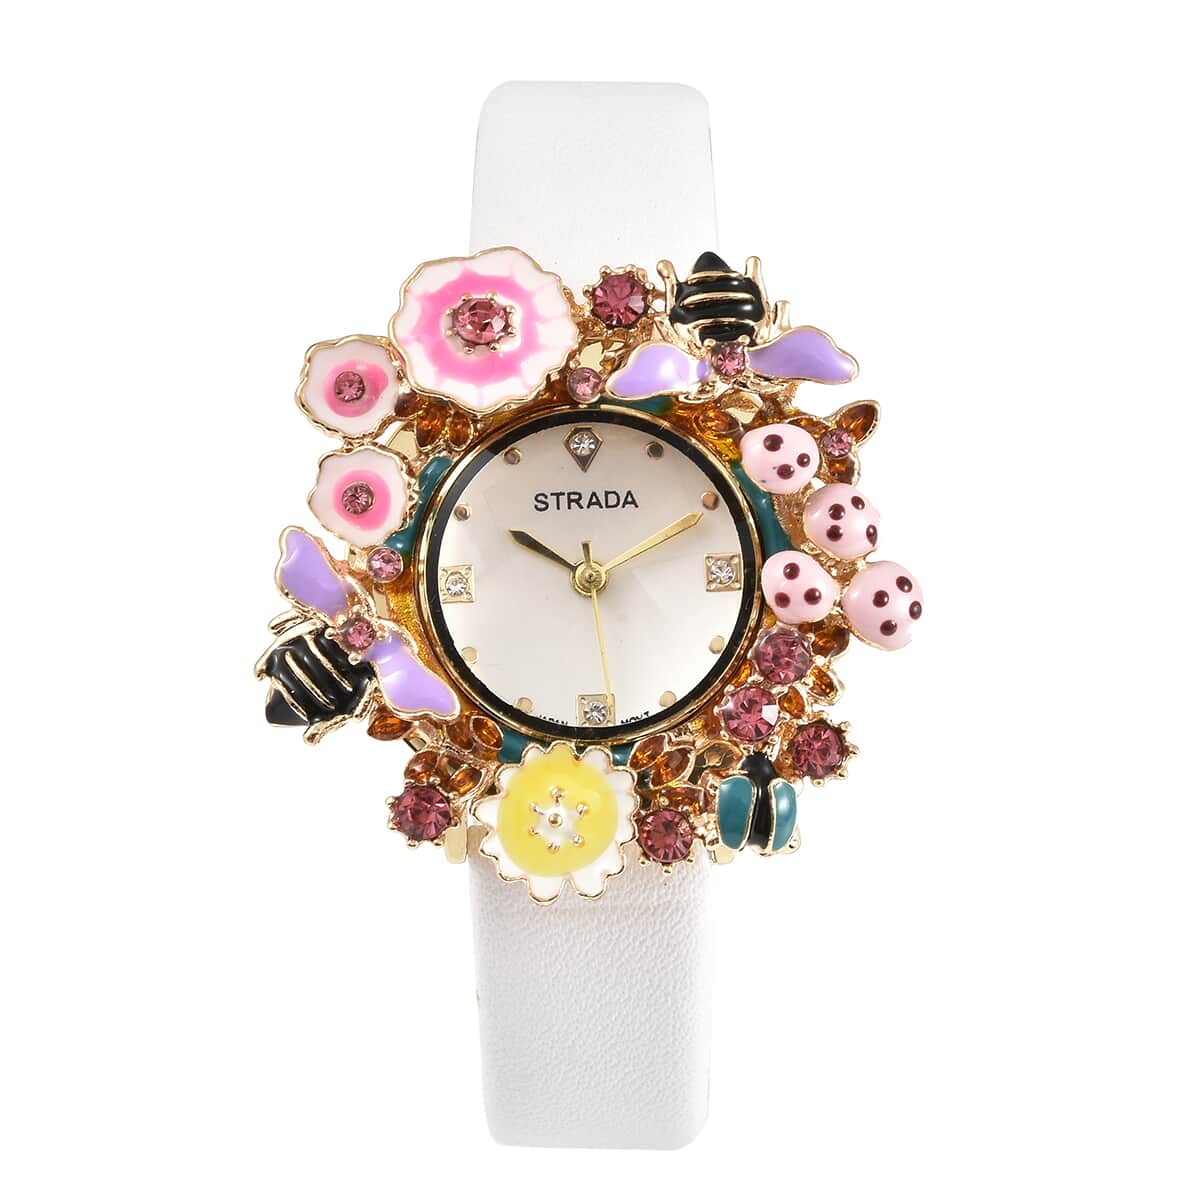 STRADA Japanese Movement White & Pink Austrian Crystal, Enameled Flora & Fauna Theme Nature-Inspired Watch with White Faux Leather Strap image number 0